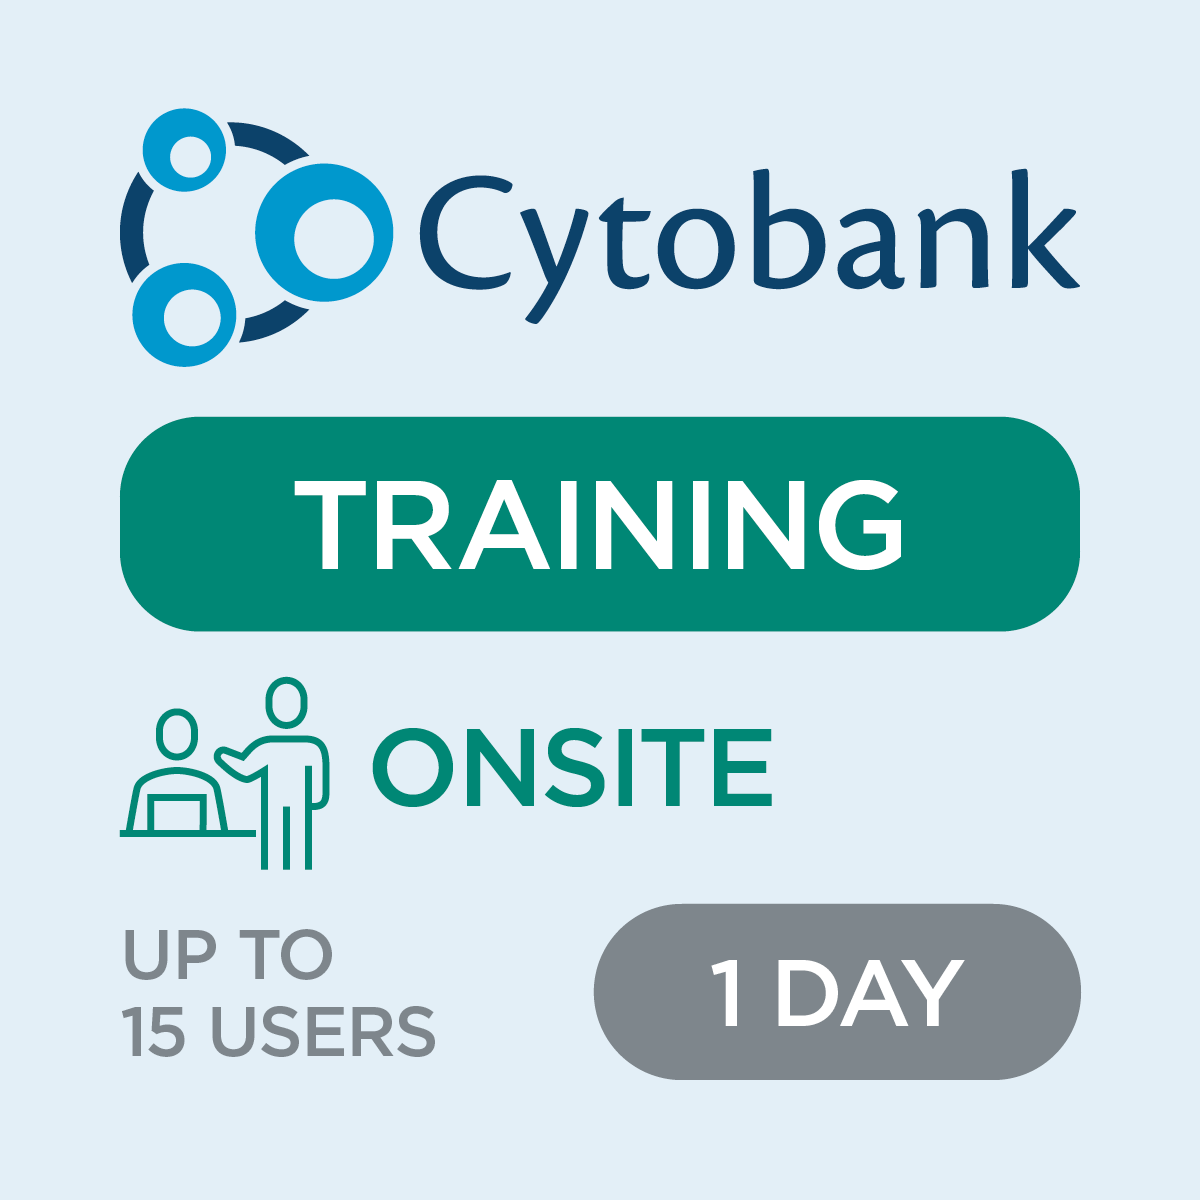 c47406, Onsite Cytobank Training, Up-to-15-users, 1-day